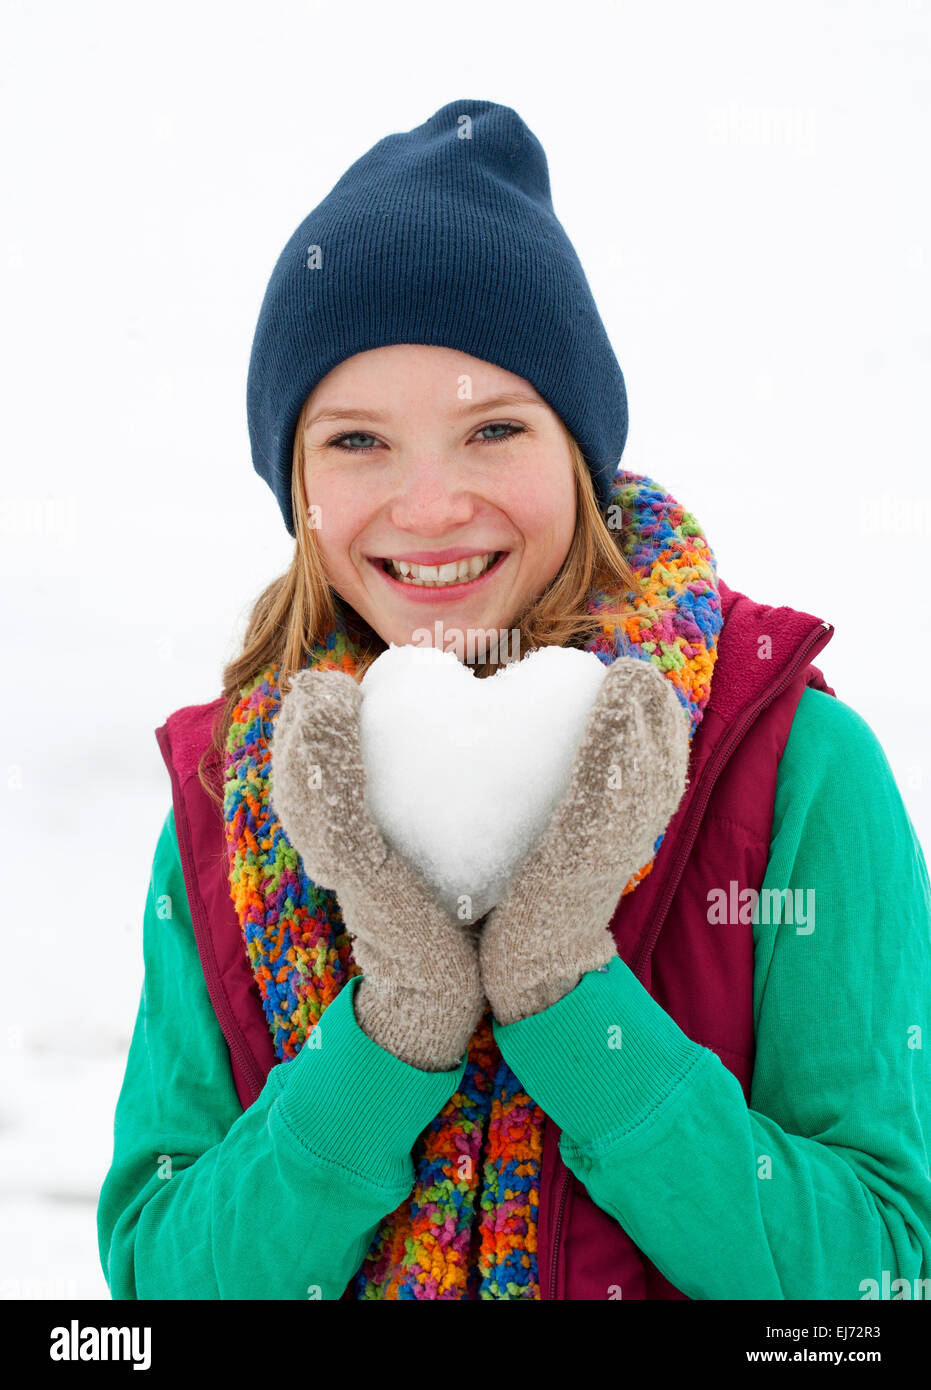 Young woman, 22 years, holding a heart made of snow Stock Photo